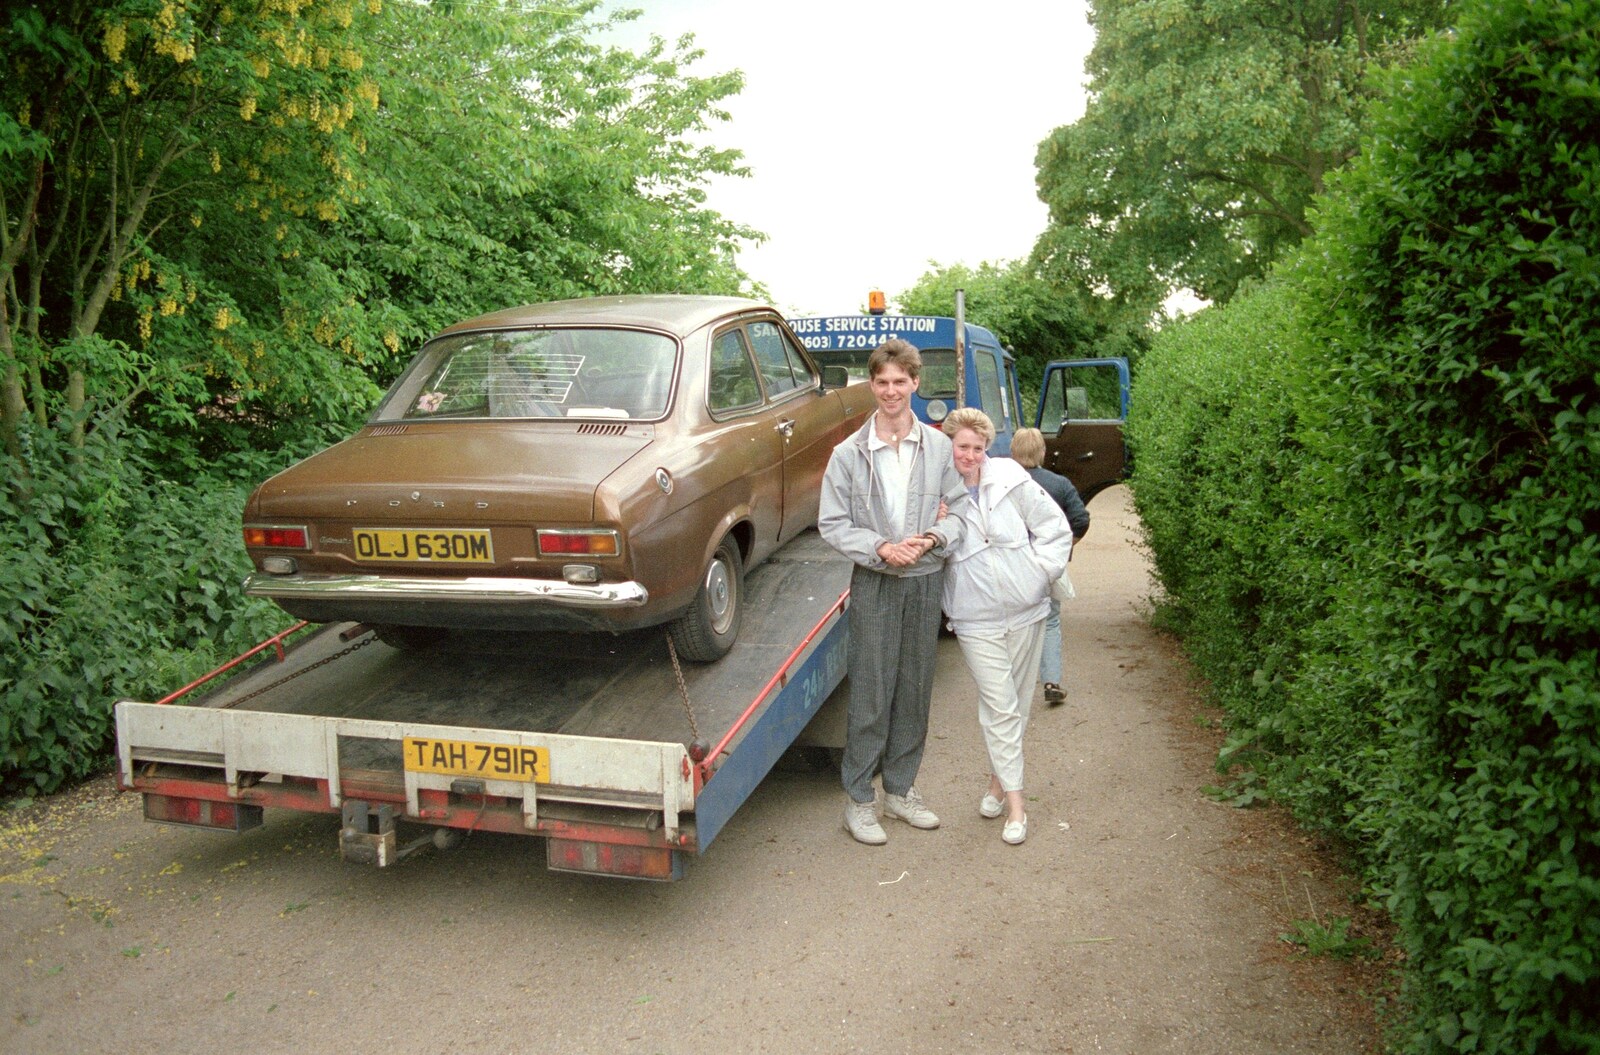 Sean's car is hauled off to a garage from Somans: Nosher's 21st Birthday at the Soman-Wherry Press, Norwich, Norfolk - 26th May 1988